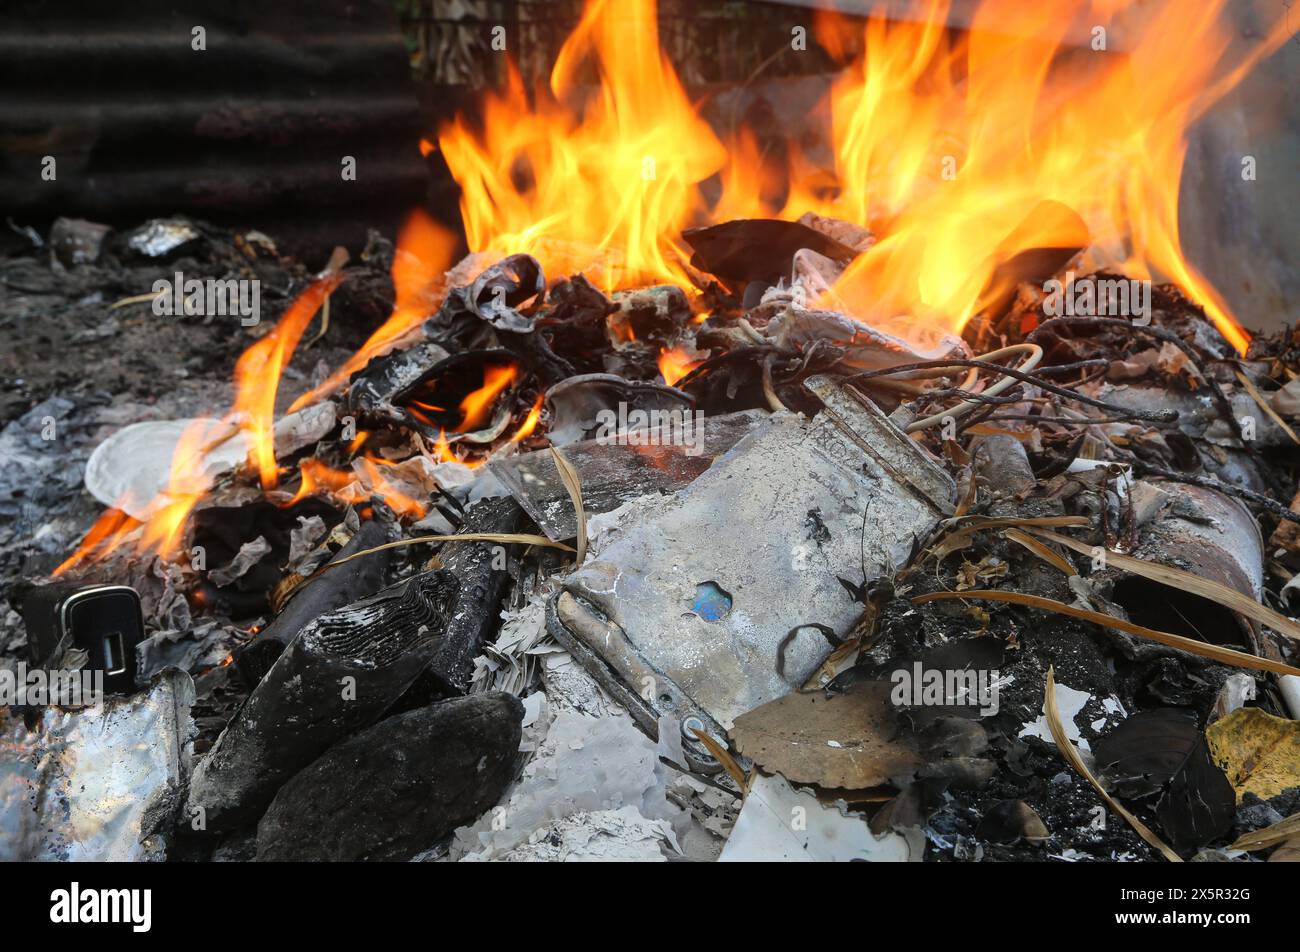 Philippines E waste pollution problem: Electronic  burned among household trash: iPhone, power bank lithium battery, cables, charger, technologic dump Stock Photo